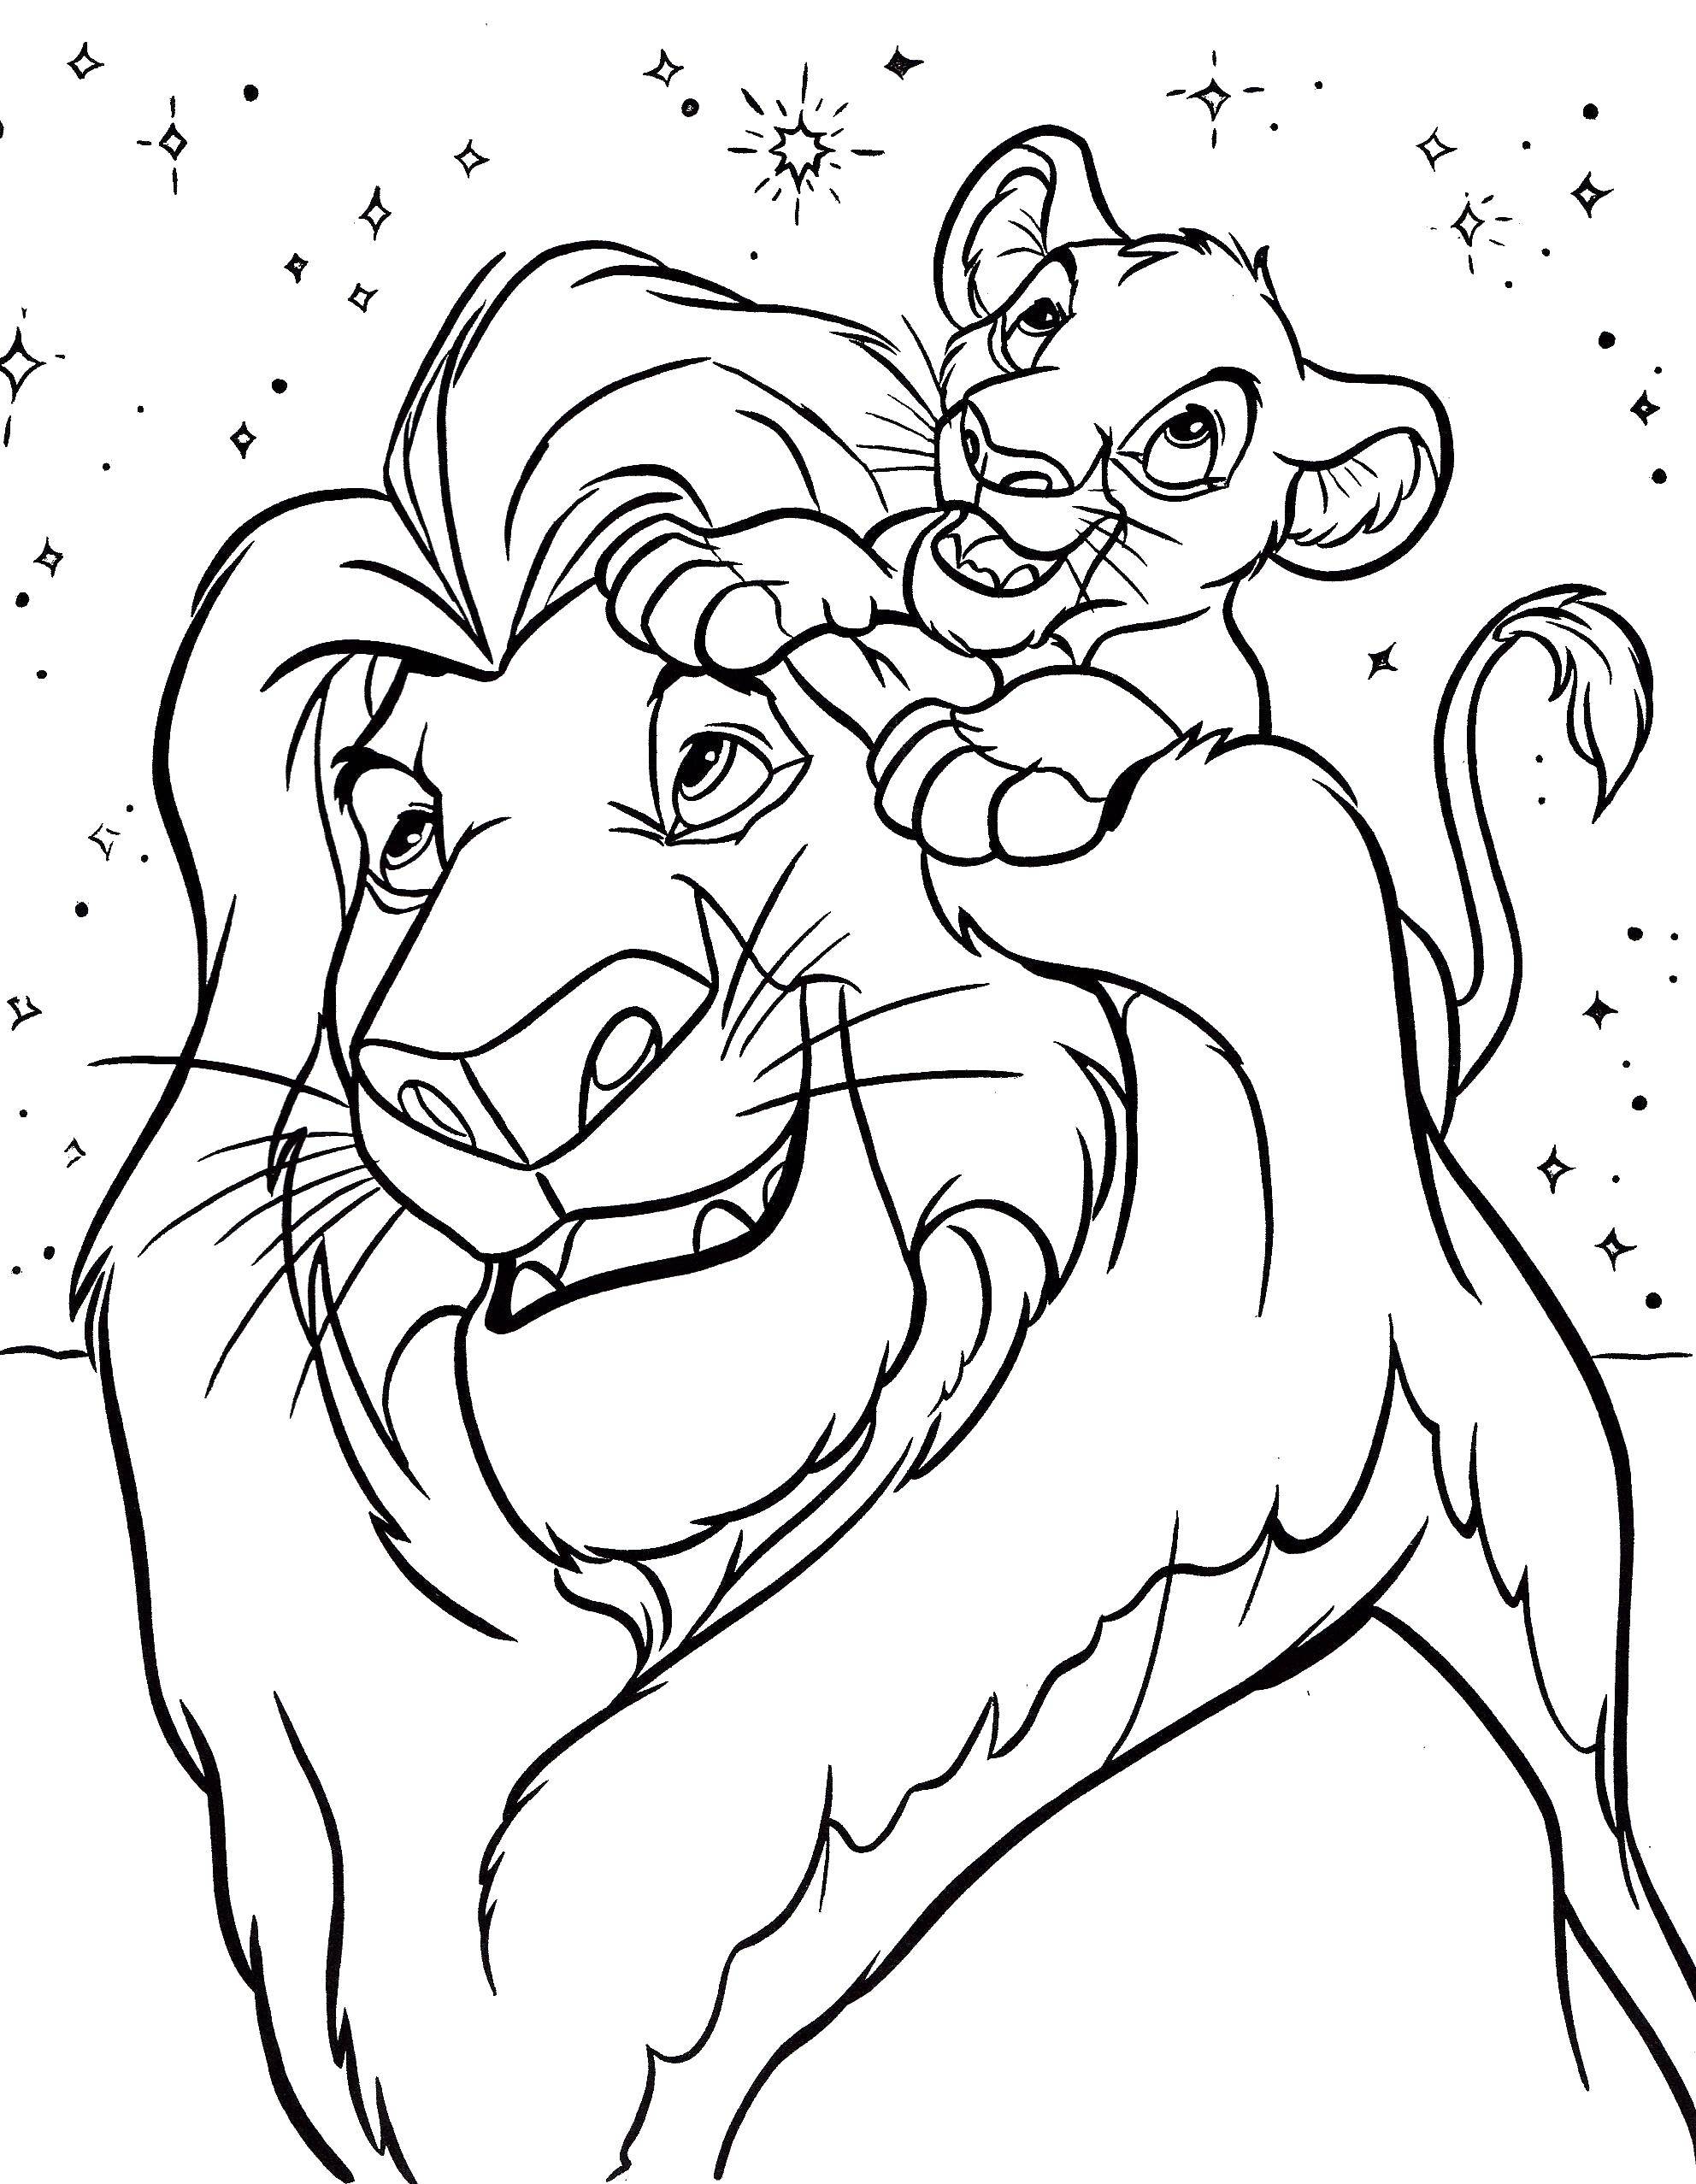 Coloring Mufasa and Simba look at the stars. Category Disney coloring pages. Tags:  Mufasa, lion, king.